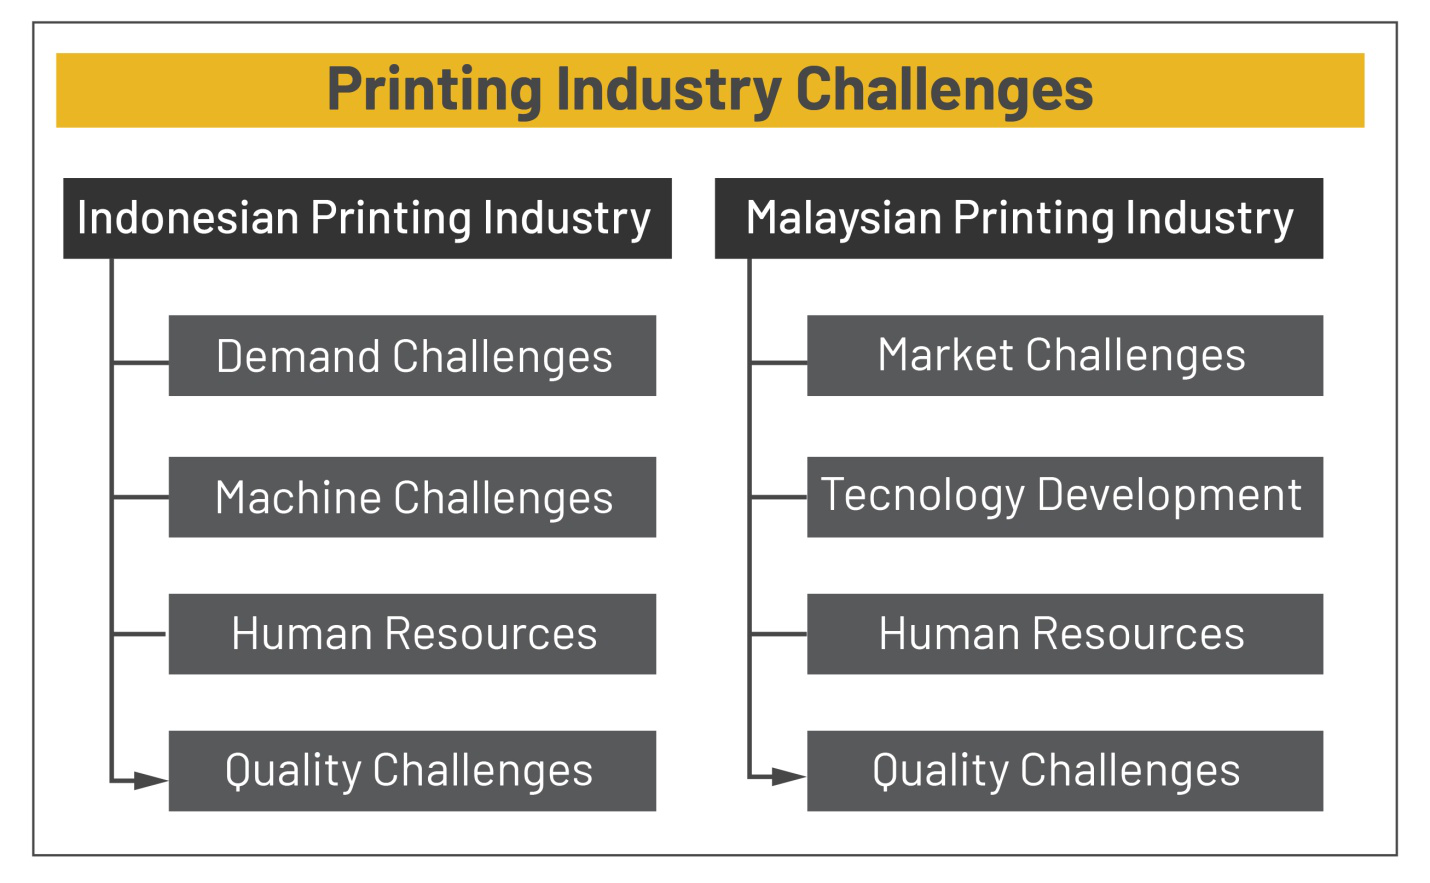 An infographic showing the challenges that the printing industry faces